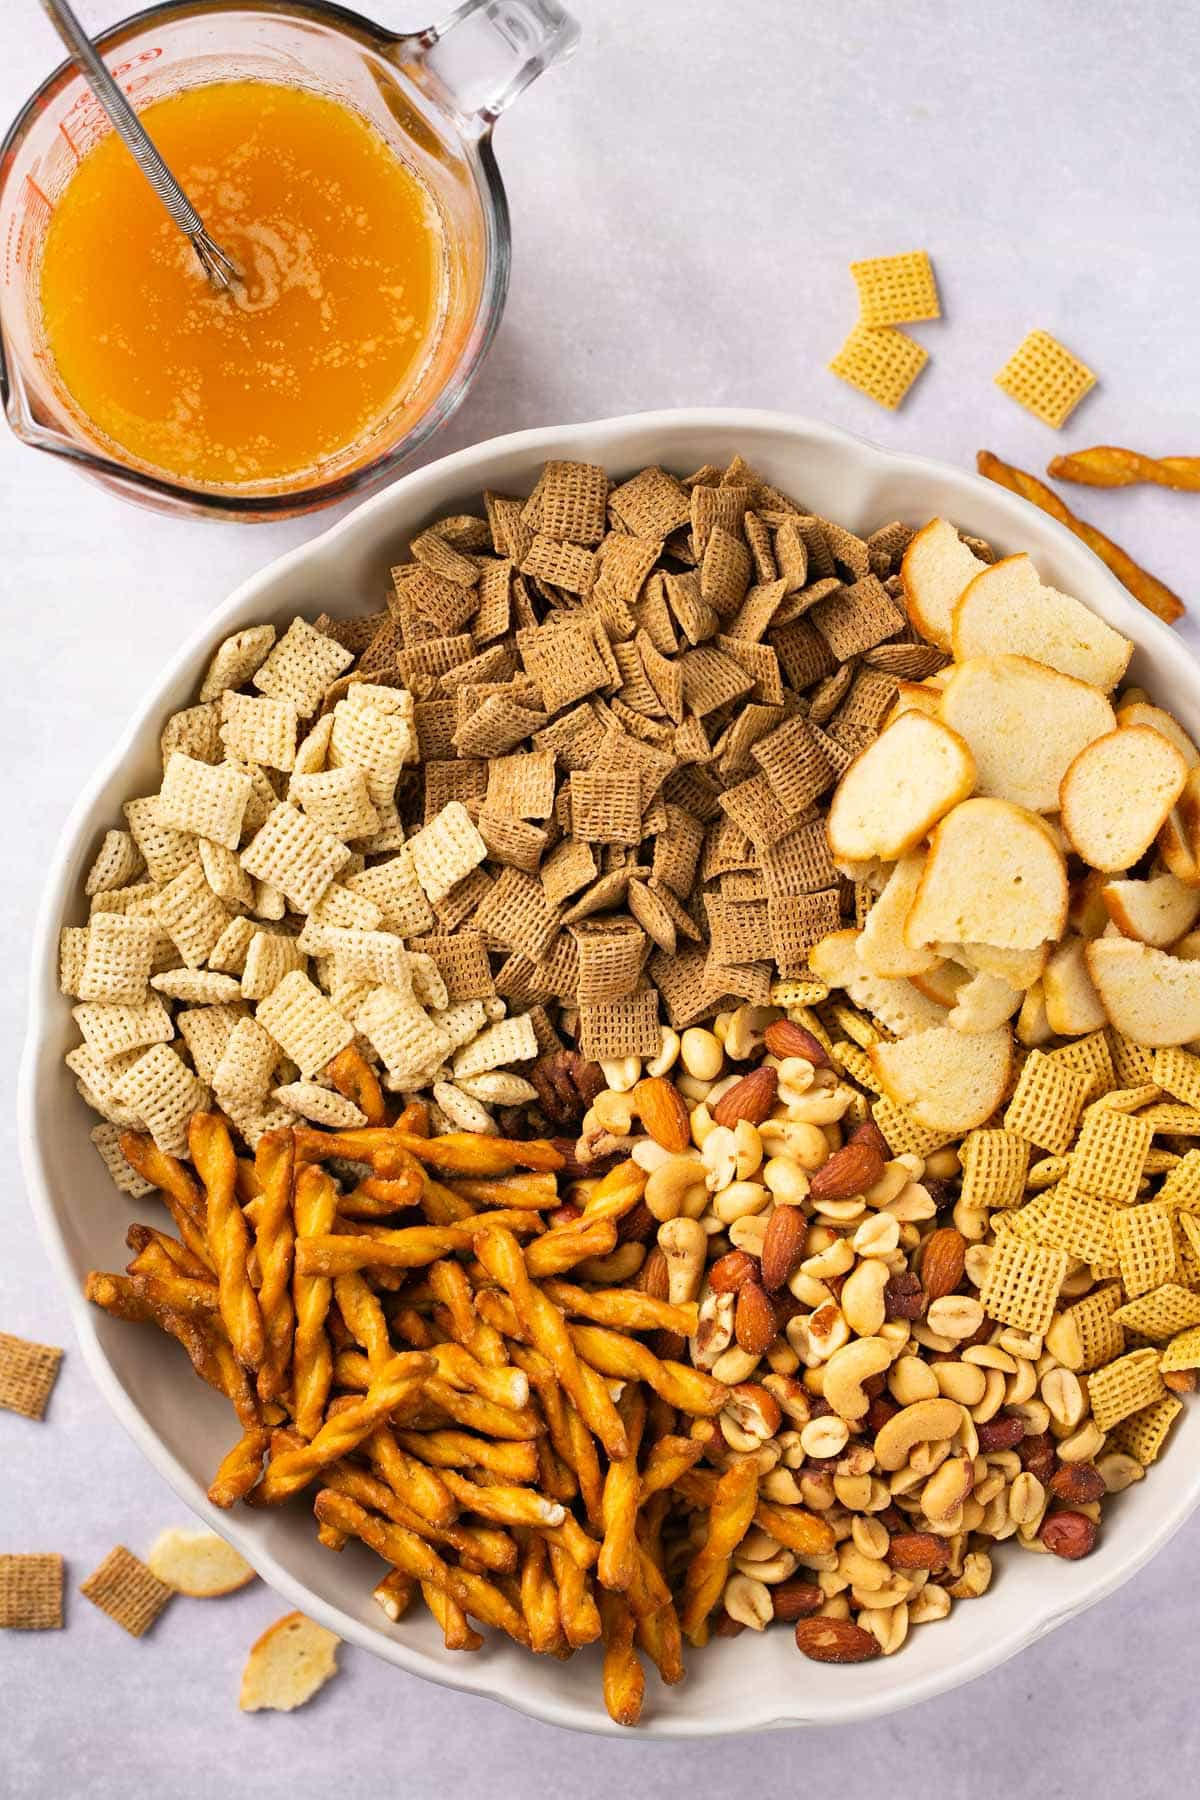 Adding crackers and cereal to a large bowl.